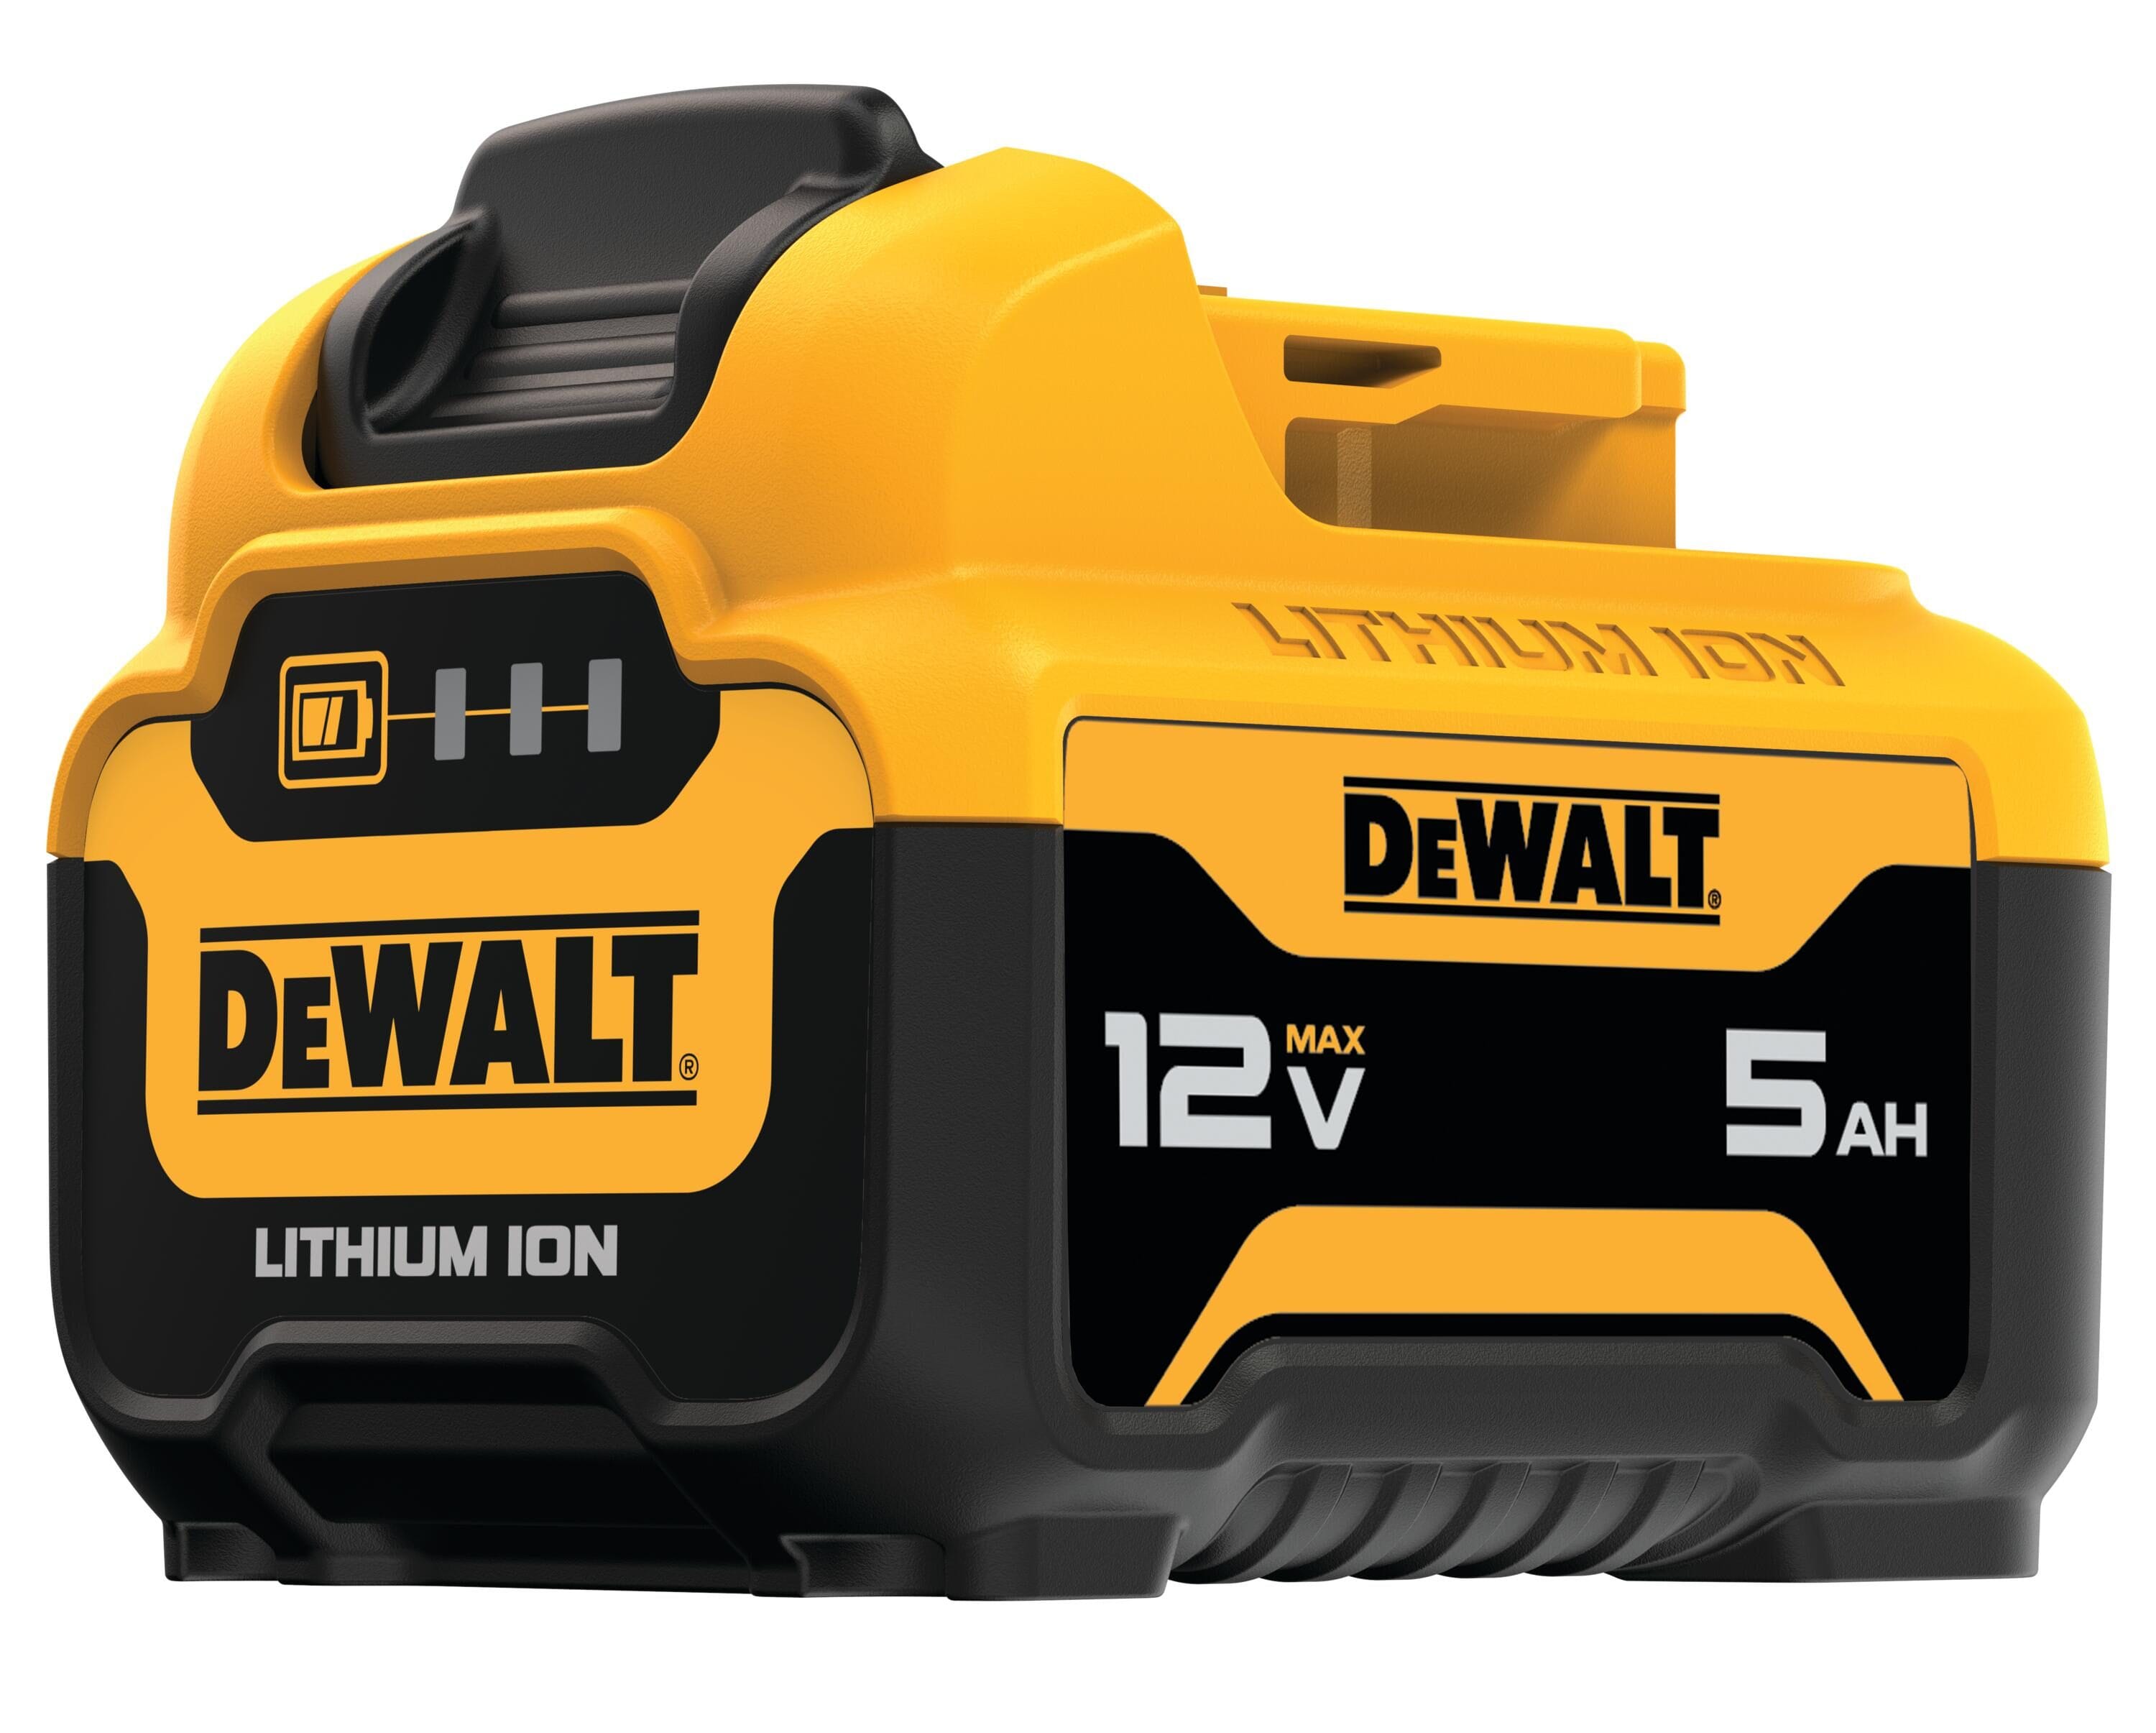 DEWALT 12-V 2-Pack Lithium-ion Battery and Charger (3 Ah and 5